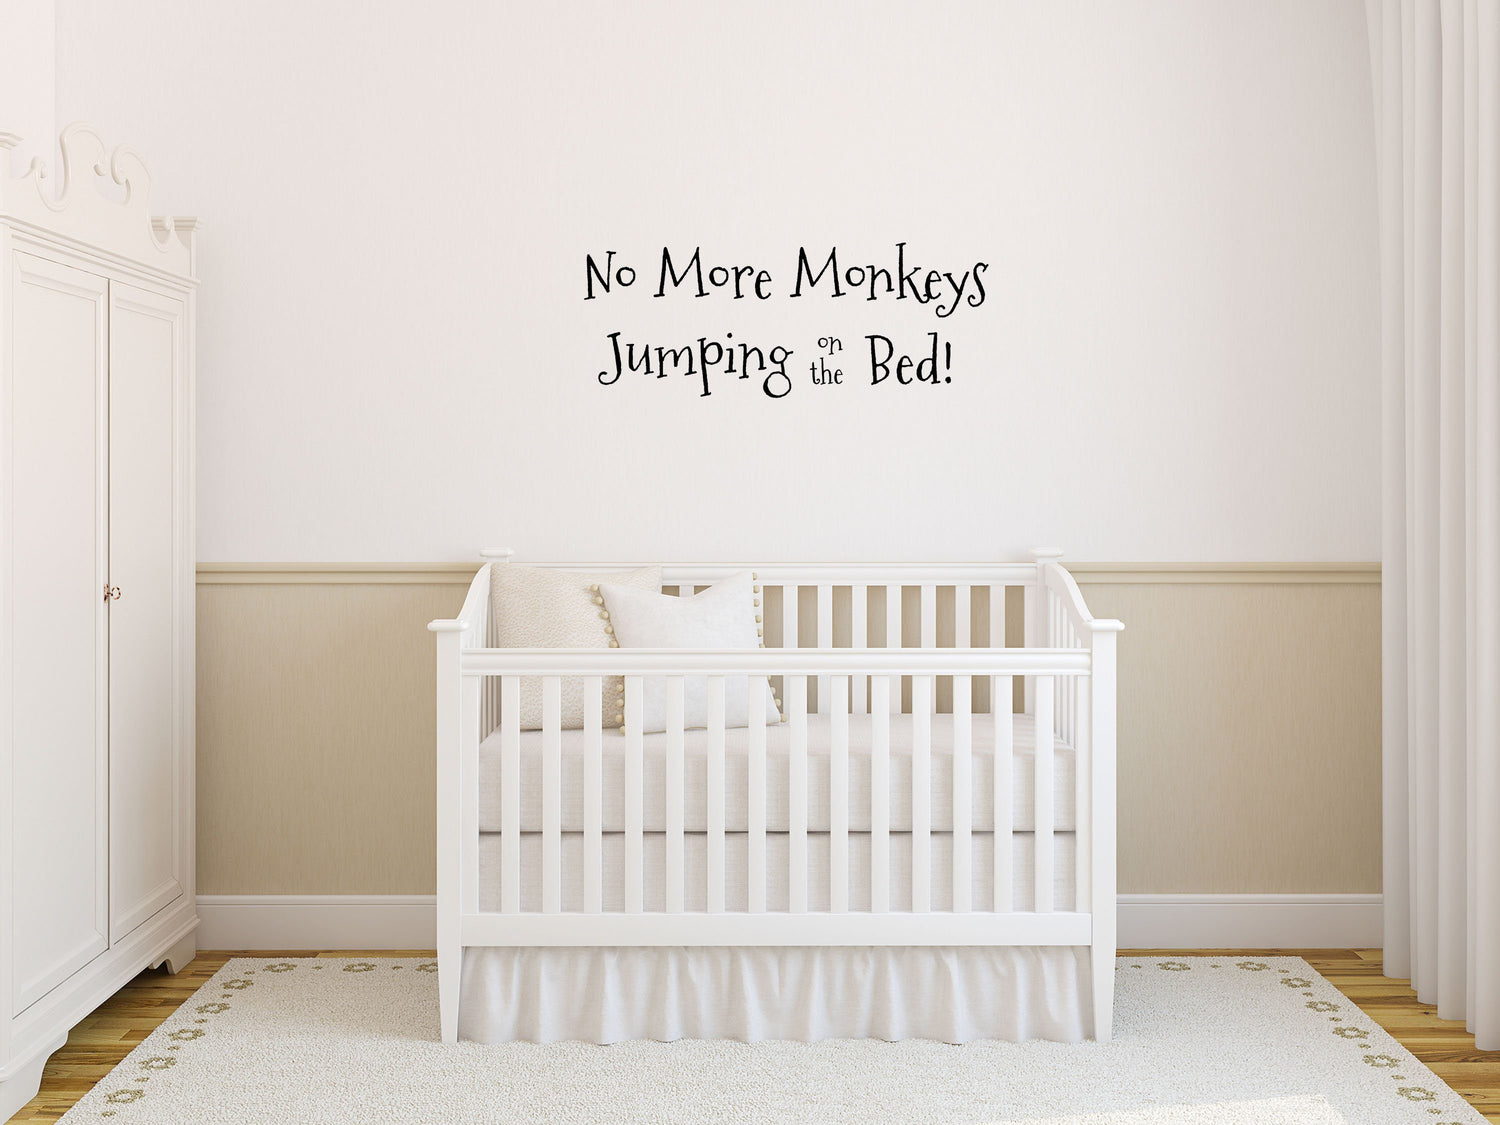 No More Monkeys Jumping on the Bed - Inspirational Wall Decals Inspirational Wall Signs 